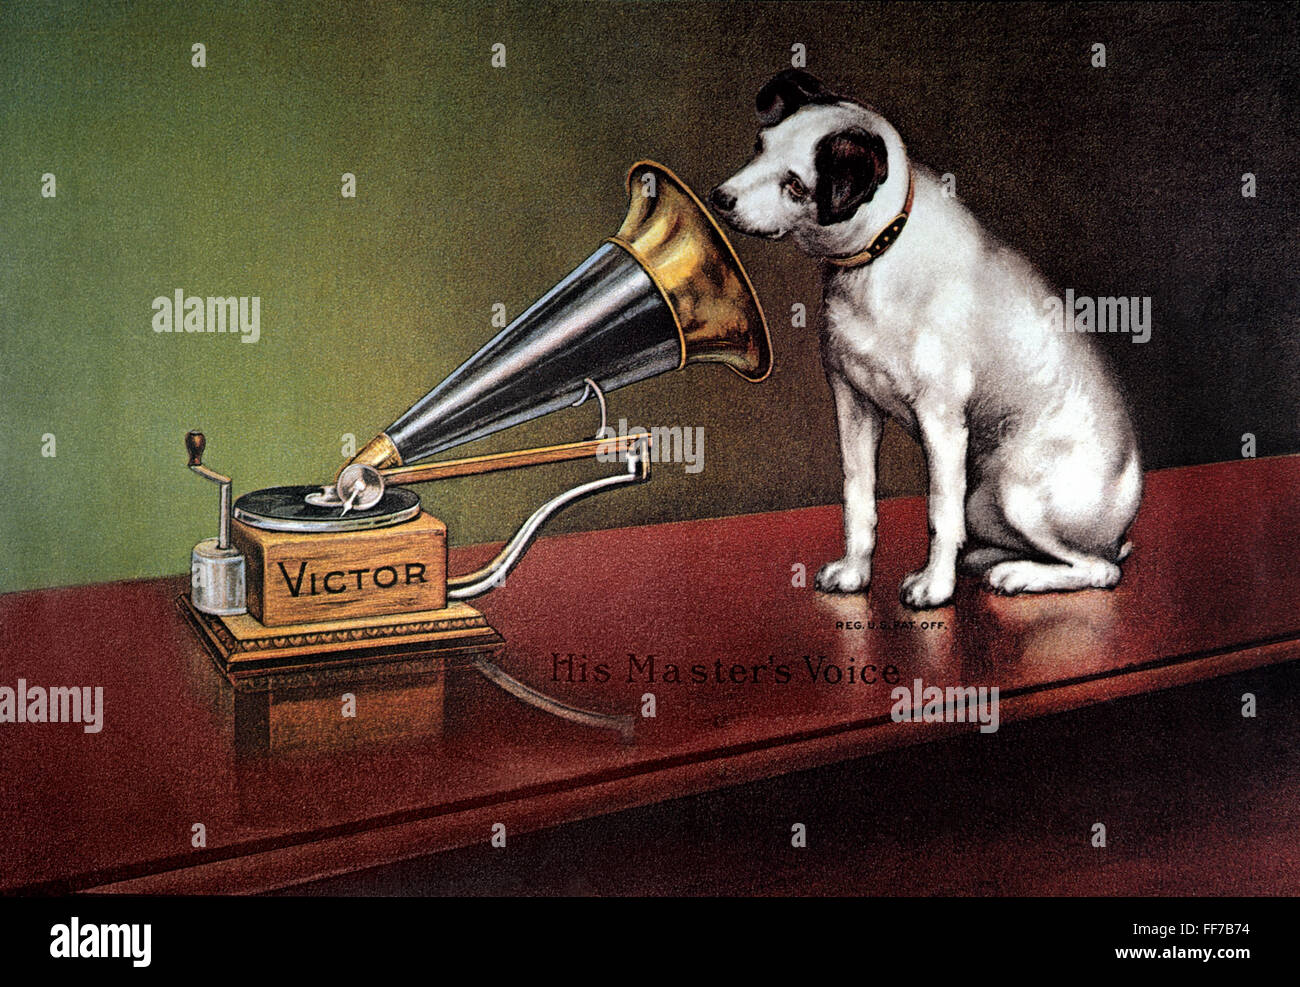 RCA VICTOR TRADEMARK. /n'His Master's Voice.' Trademark image of RCA Victor, featuring Nipper the dog. American lithograph poster, c1920. Stock Photo